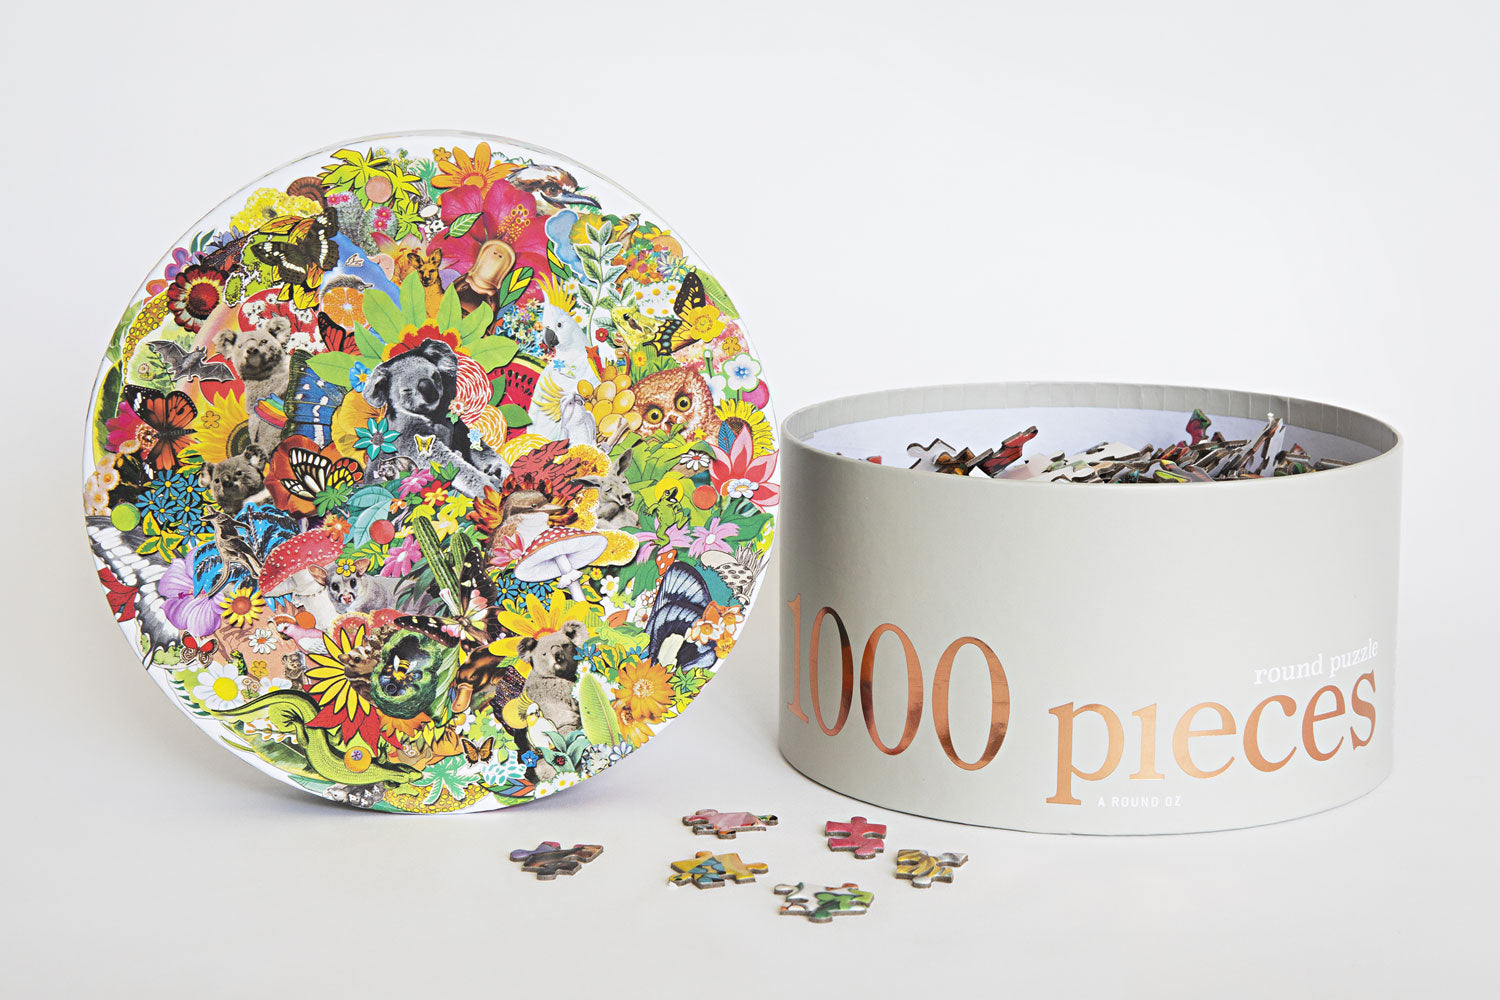 A round 1000-piece puzzle featuring the intricate Maximillian pattern with a harmonious blend of colors.